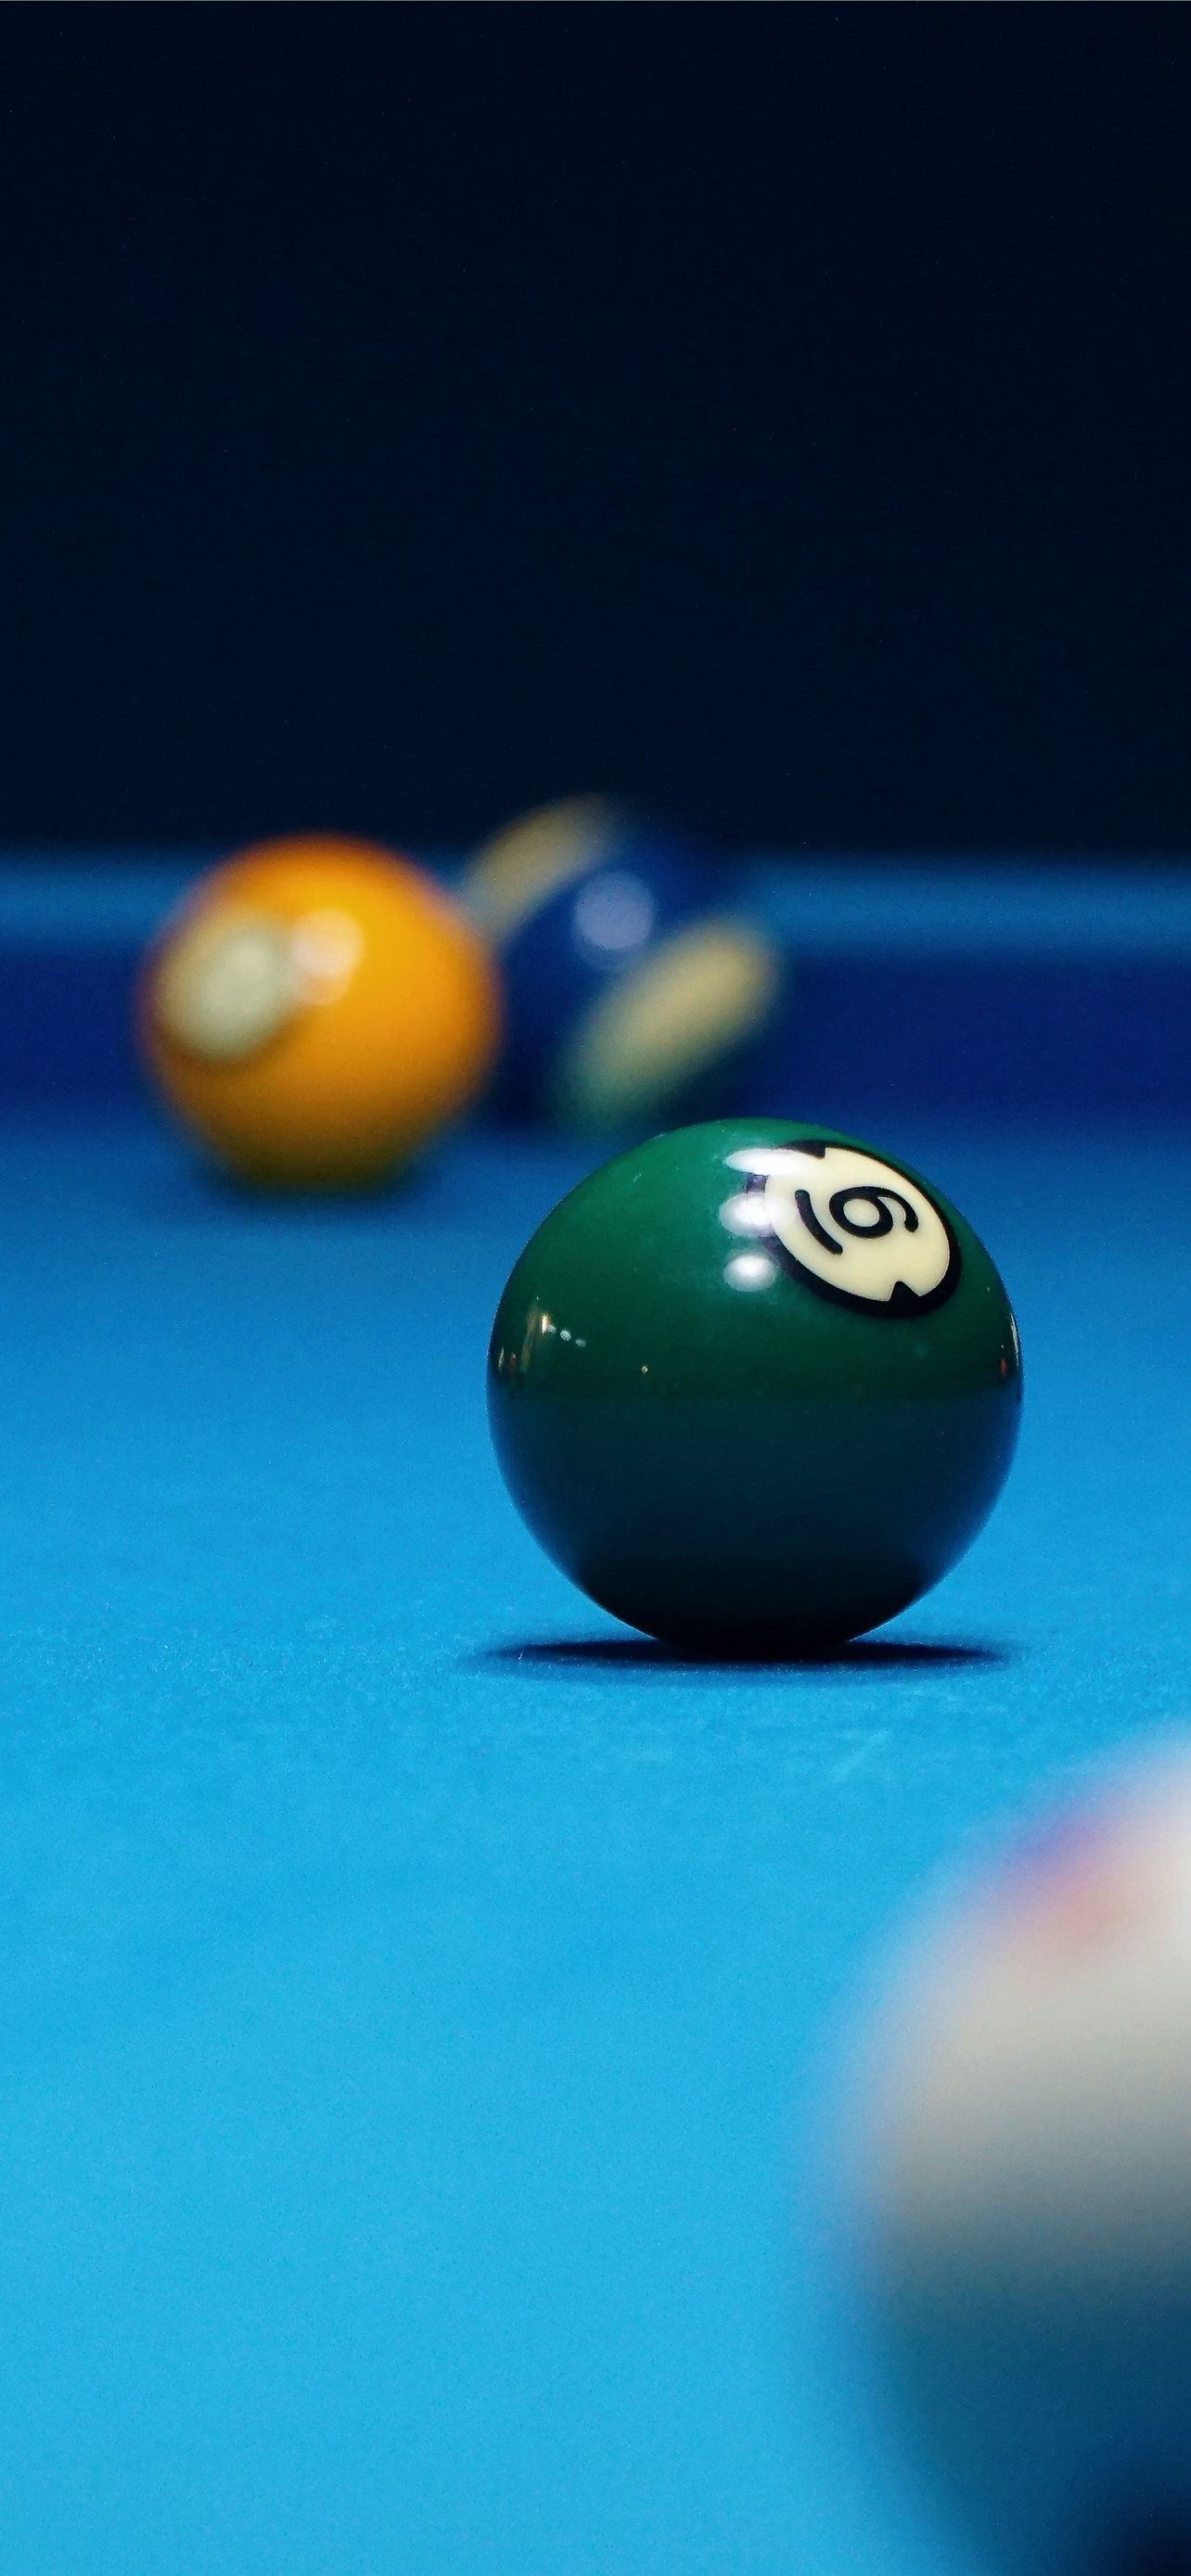 Pool (Cue Sports): American-style eight-ball, The most common style played around the world by professionals. 1290x2780 HD Background.